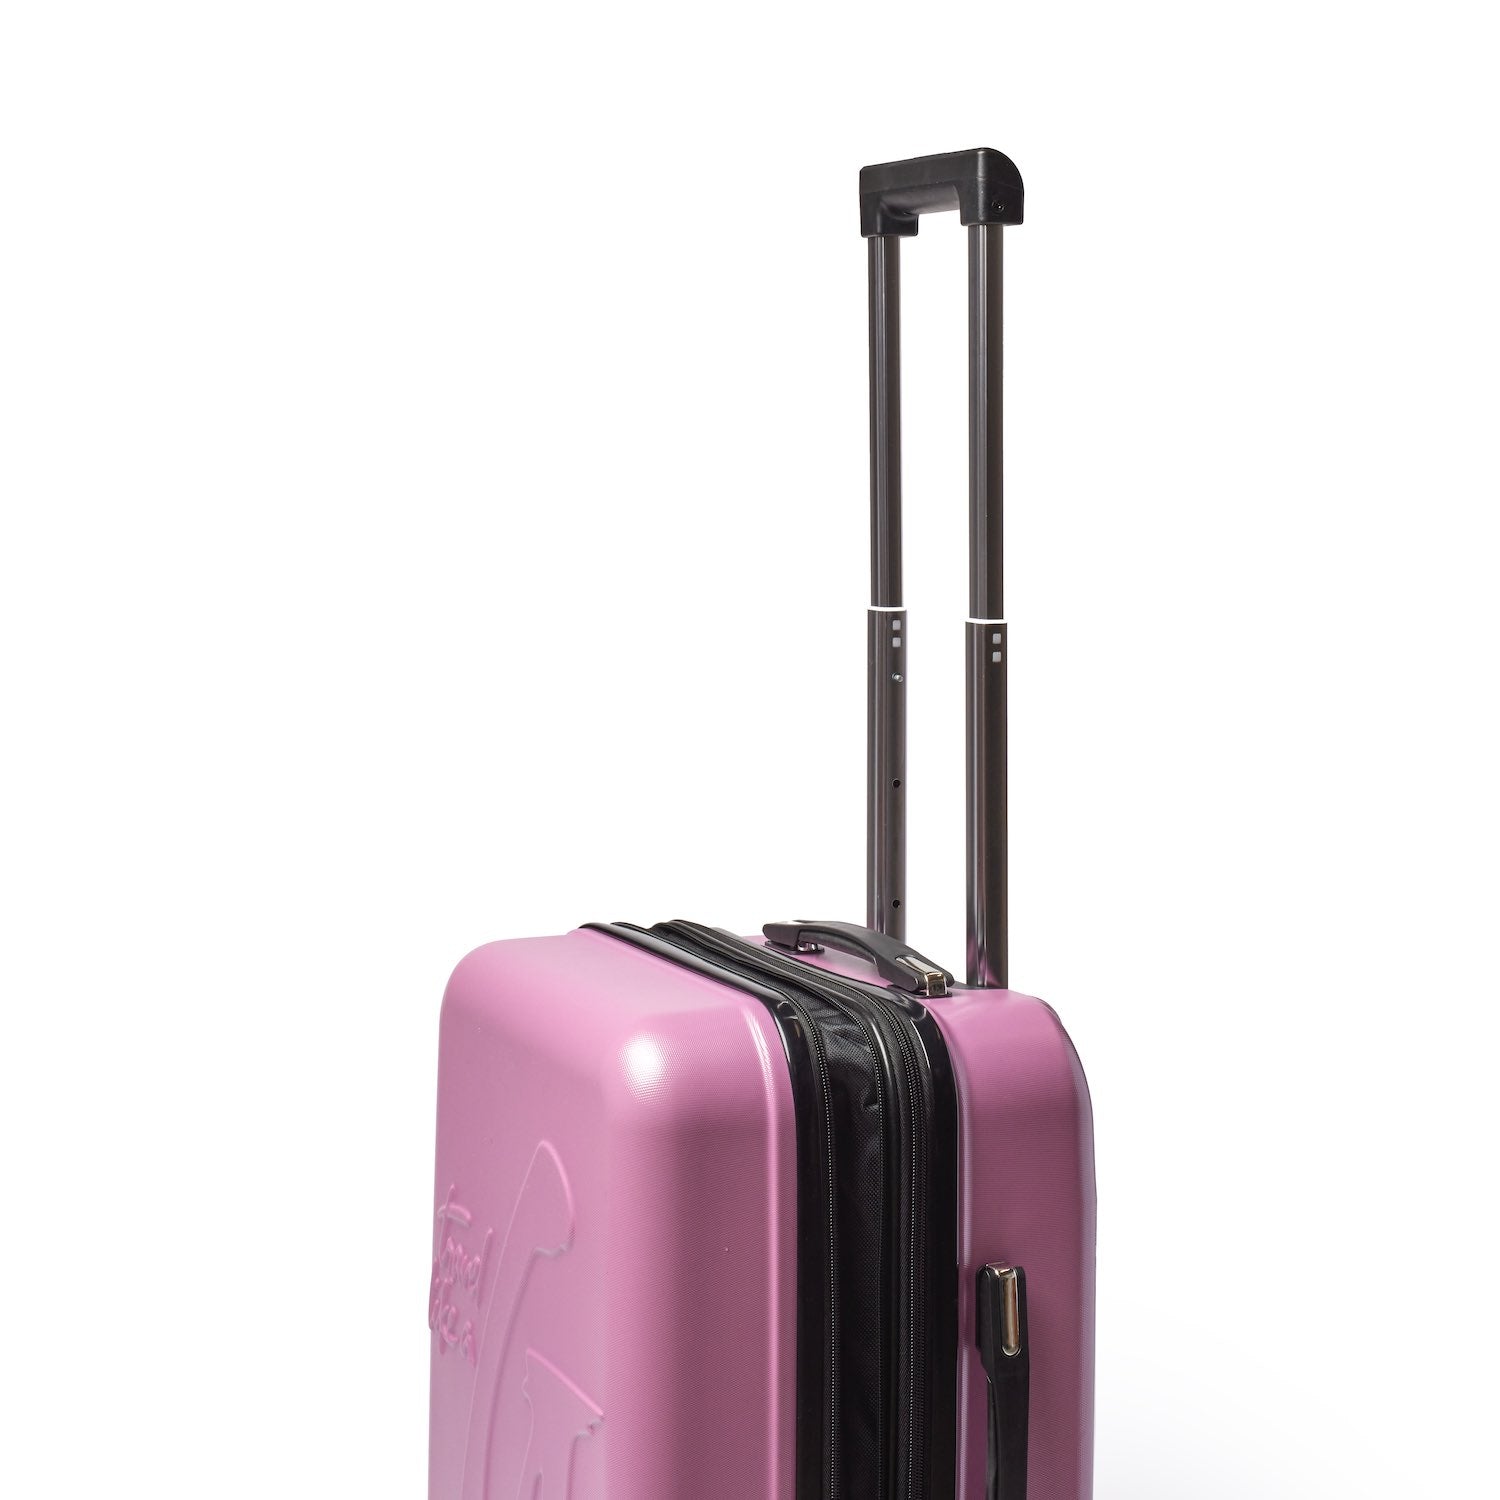 STANDARD CARRY-ON LUGGAGE LIGHT PINK